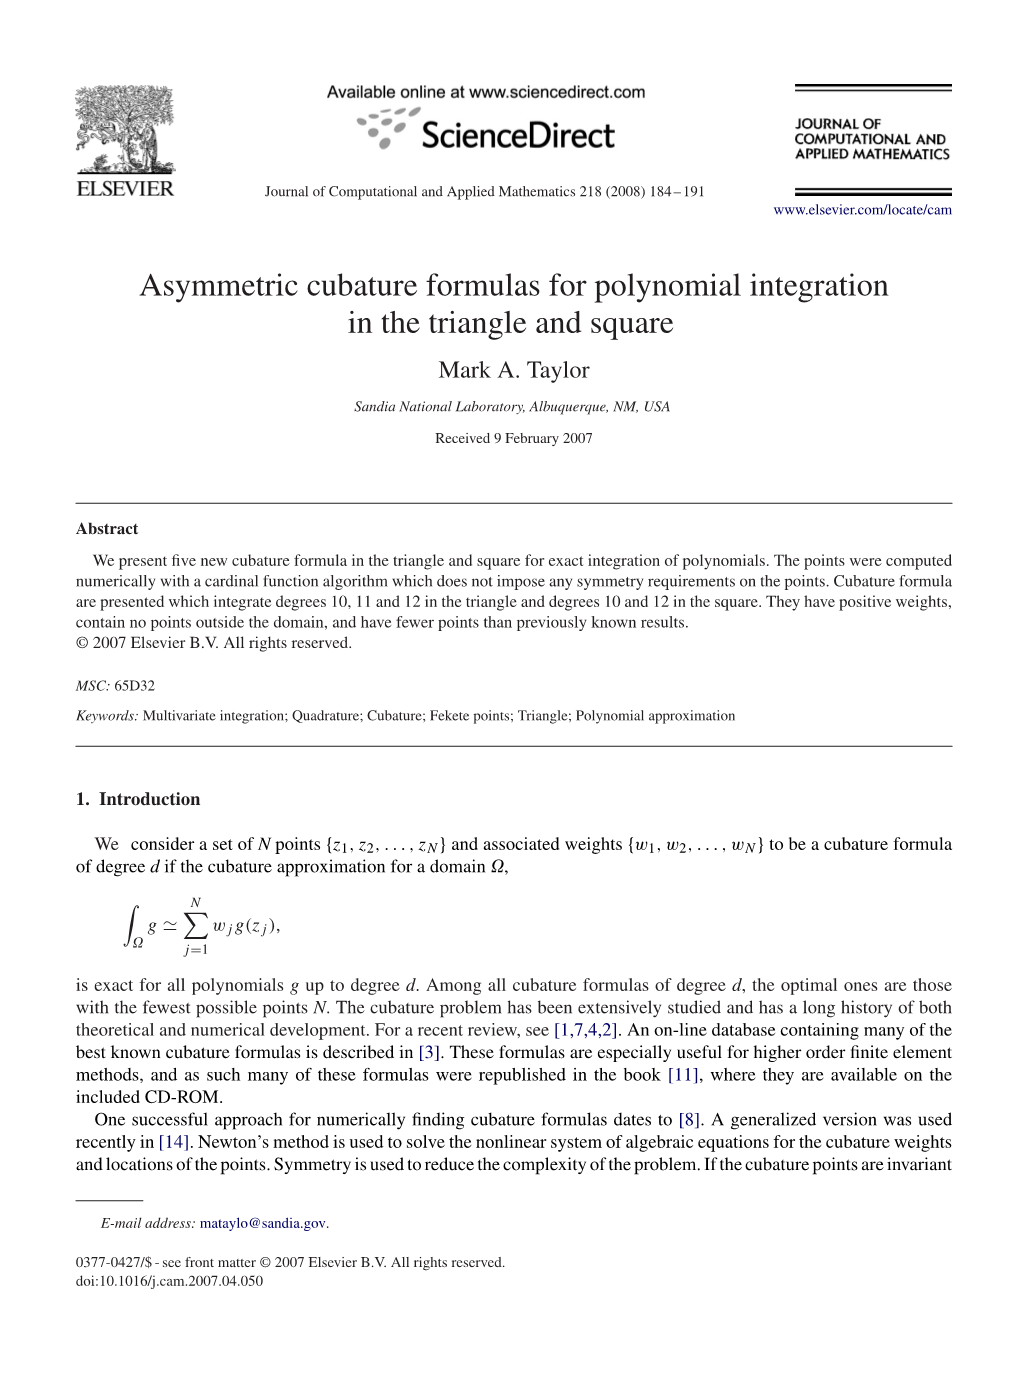 Asymmetric Cubature Formulas for Polynomial Integration in the Triangle and Square Mark A